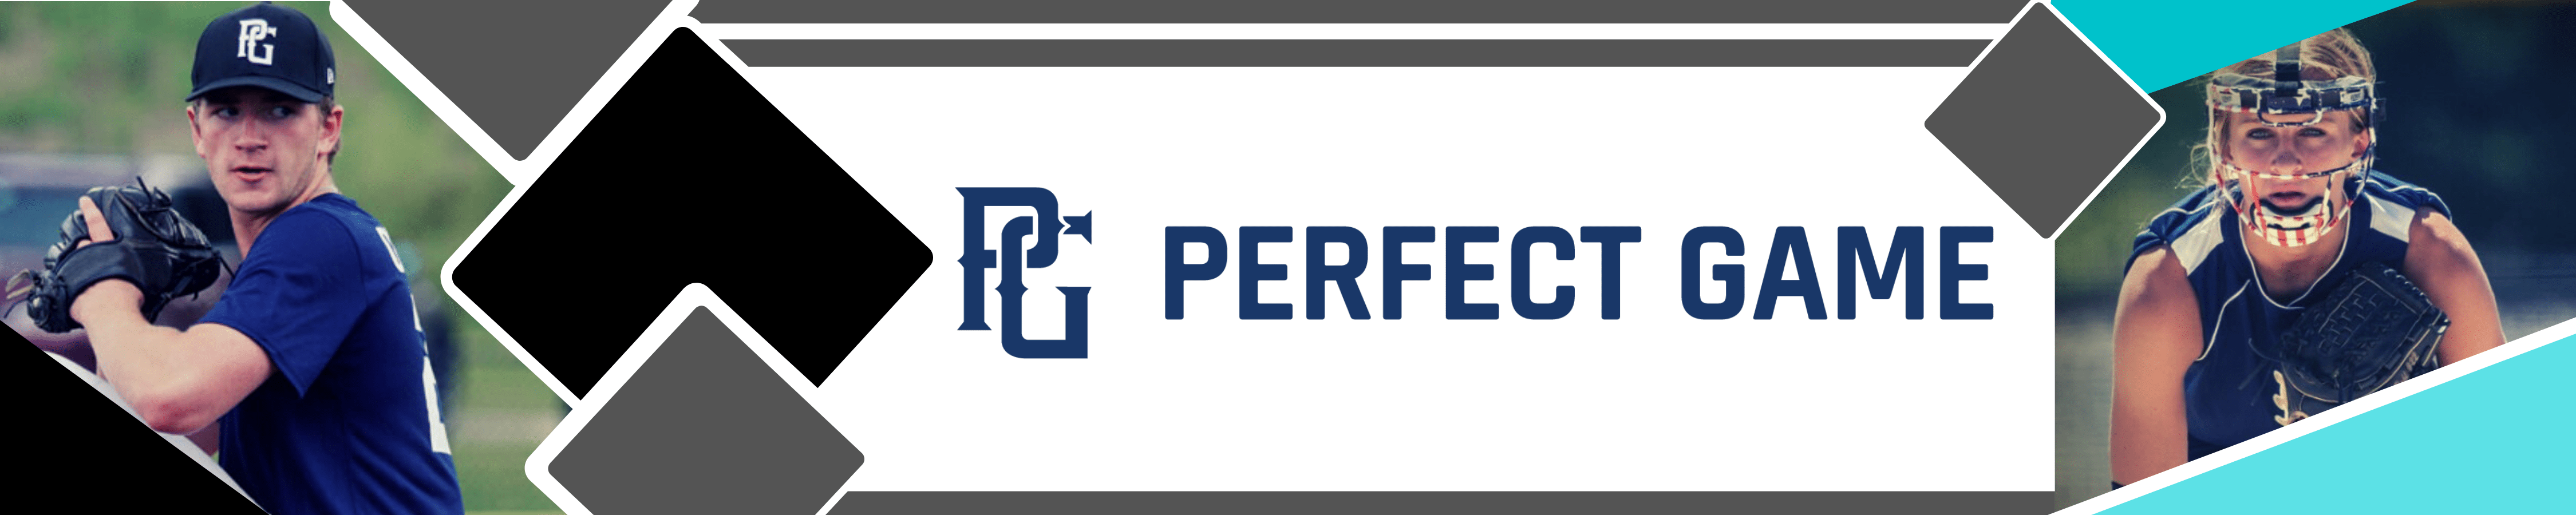 Perfect Game Banner